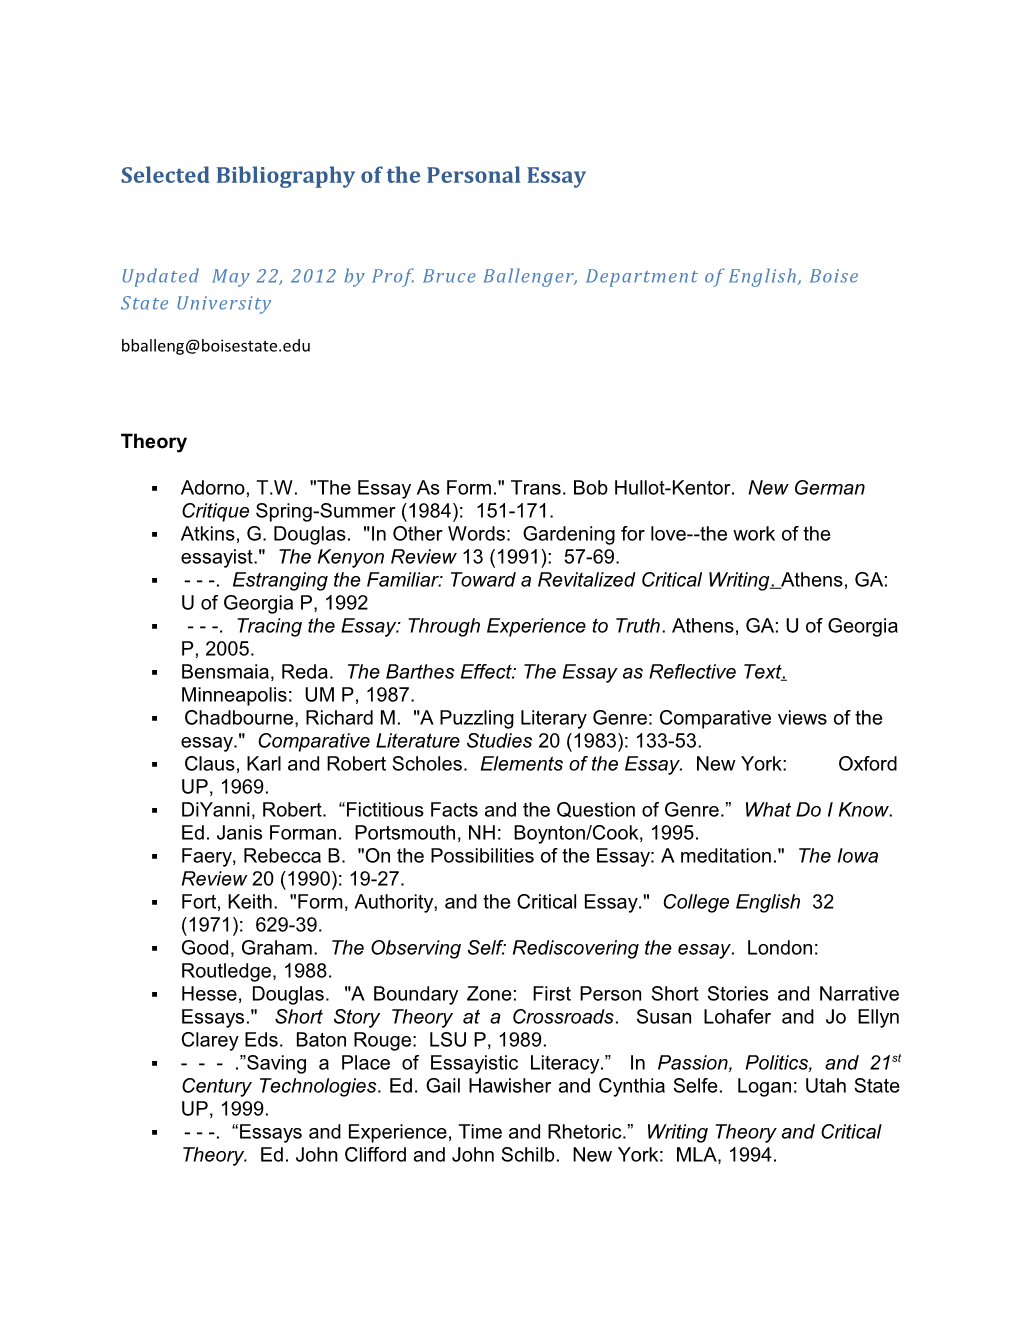 Selected Bibliography of the Personal Essay